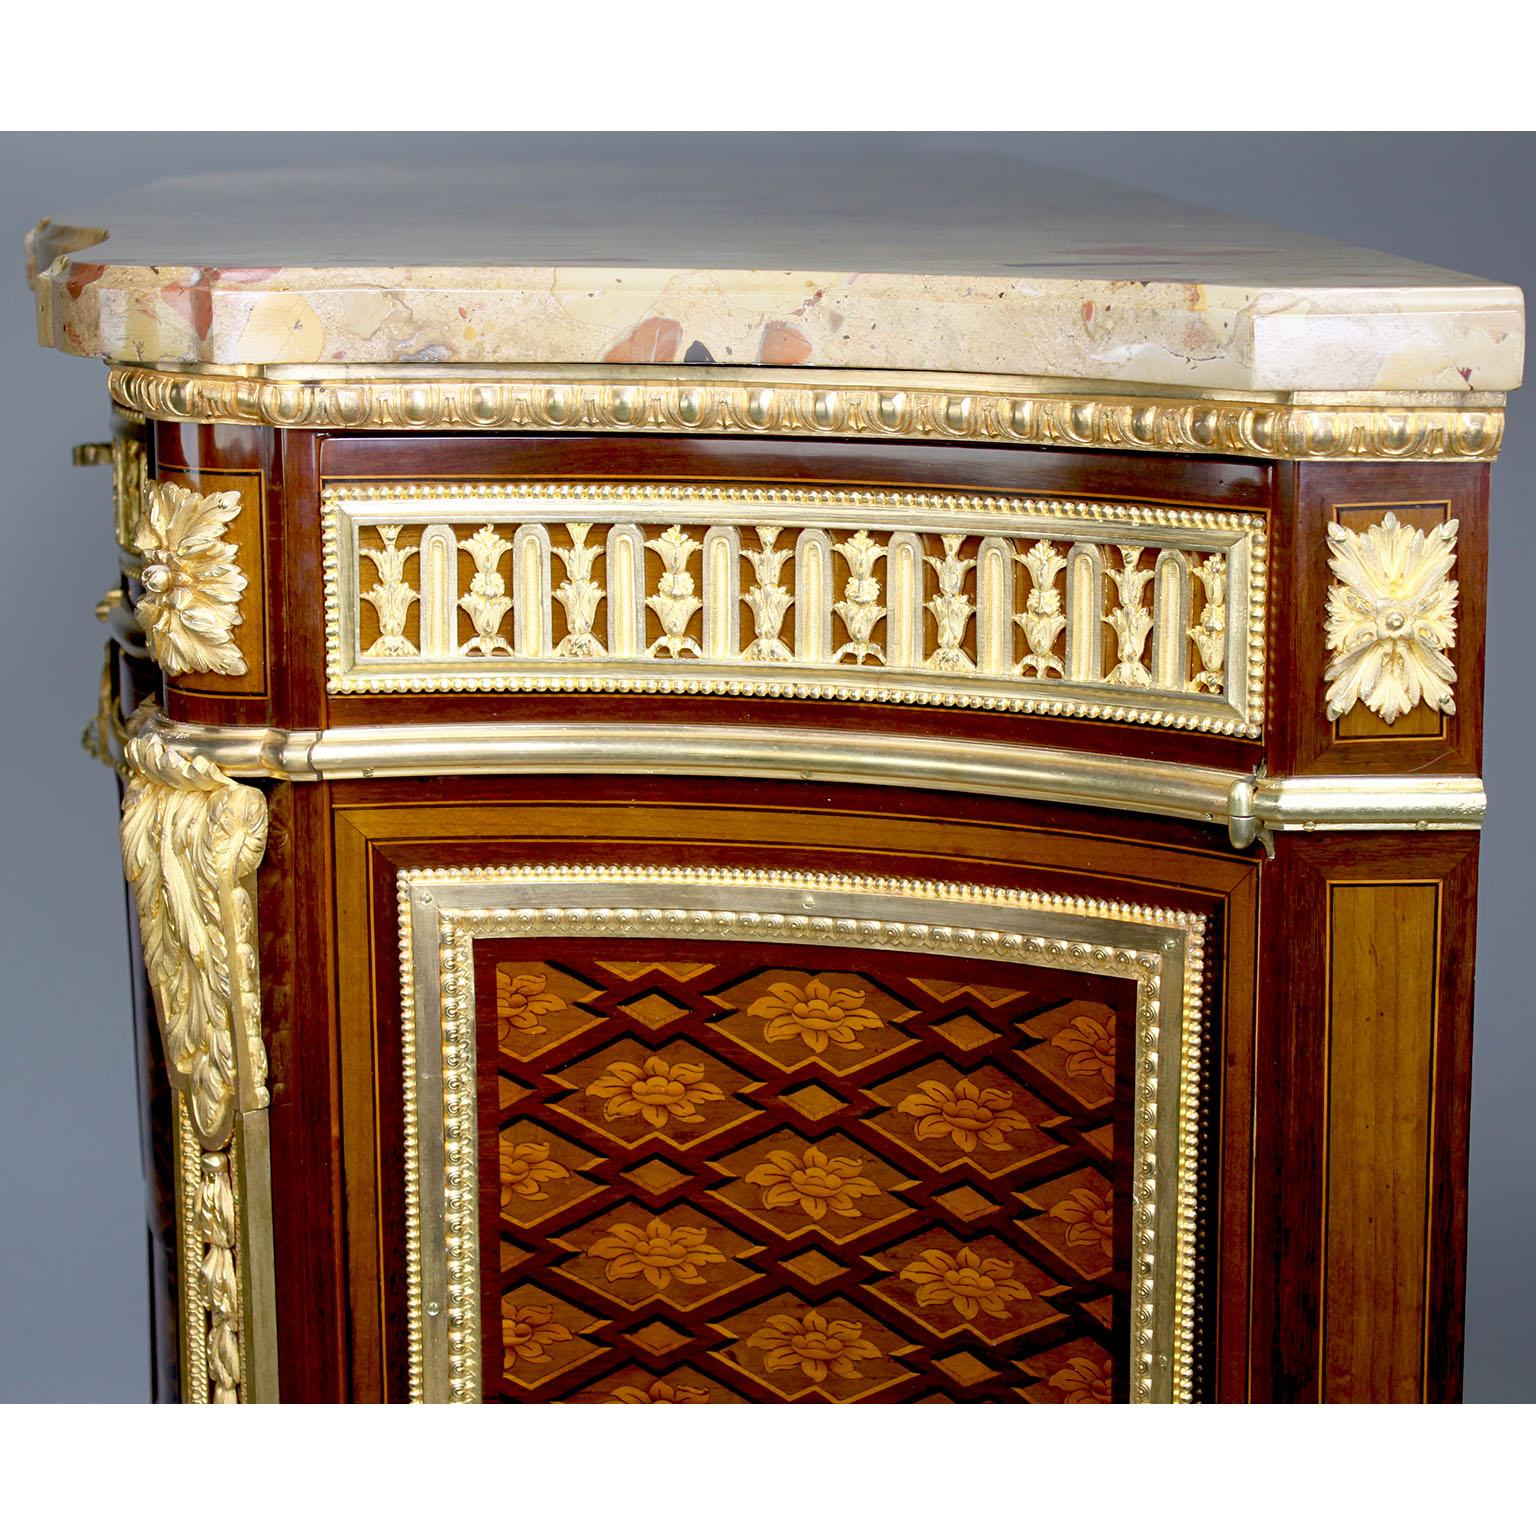 French 19th Century Louis XV-XVI Ormolu Mounted Marquetry Commode Marble Top For Sale 7